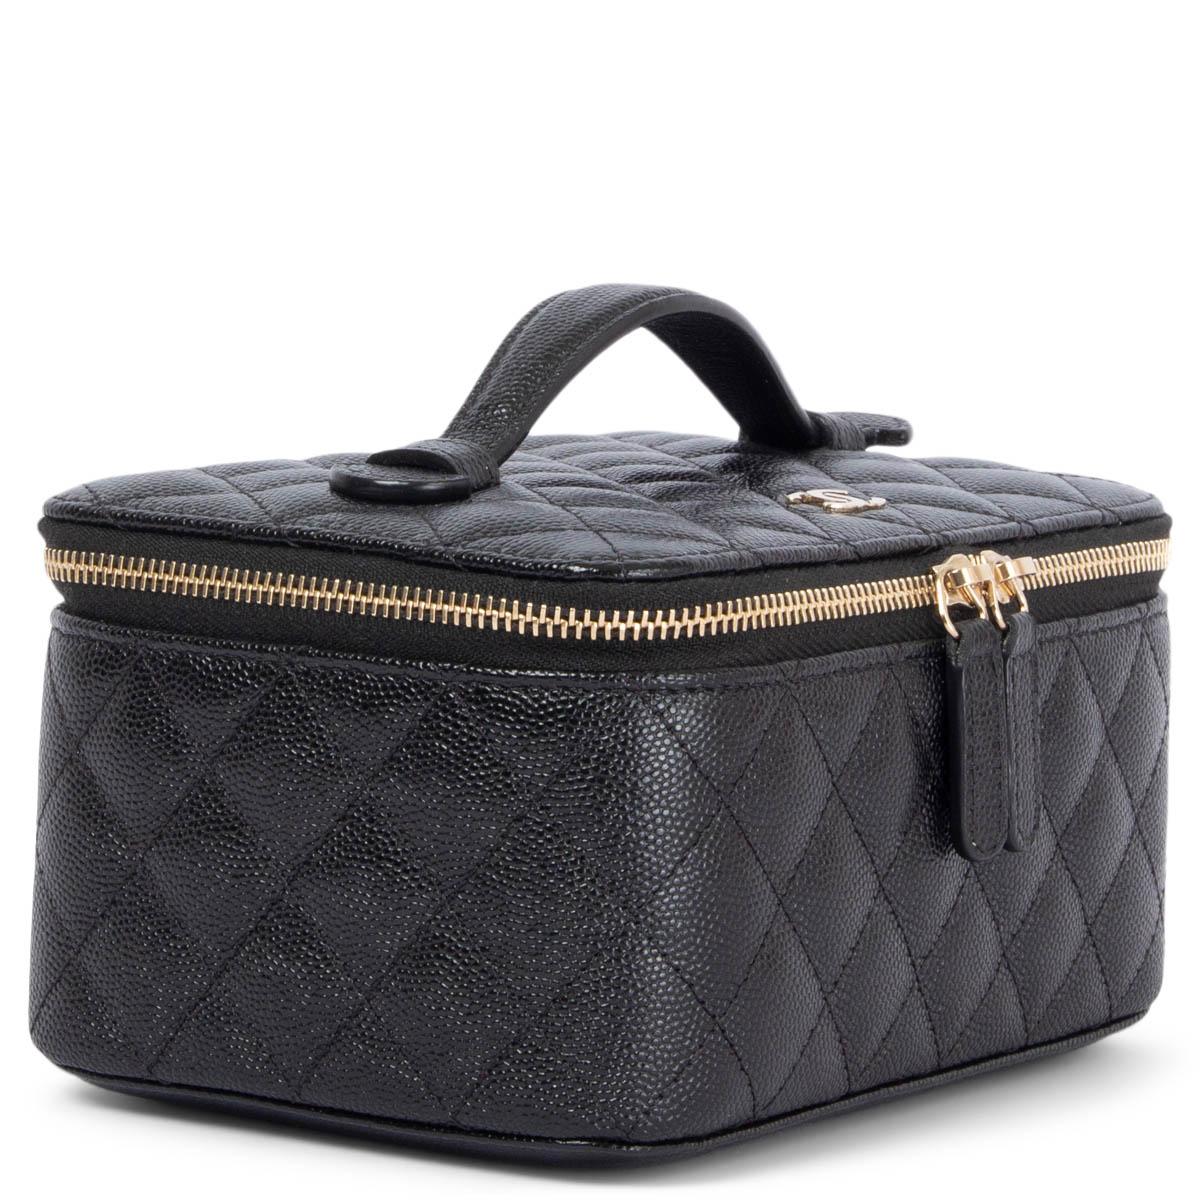 100% authentic Chanel 2020 jewellery case in black caviar leather featuring light gold-tone hardware. Keeps jewellery well organized in black soft alcantara with a soft roll for watches, protection for rings and earrings. Brand new. Comes with dust